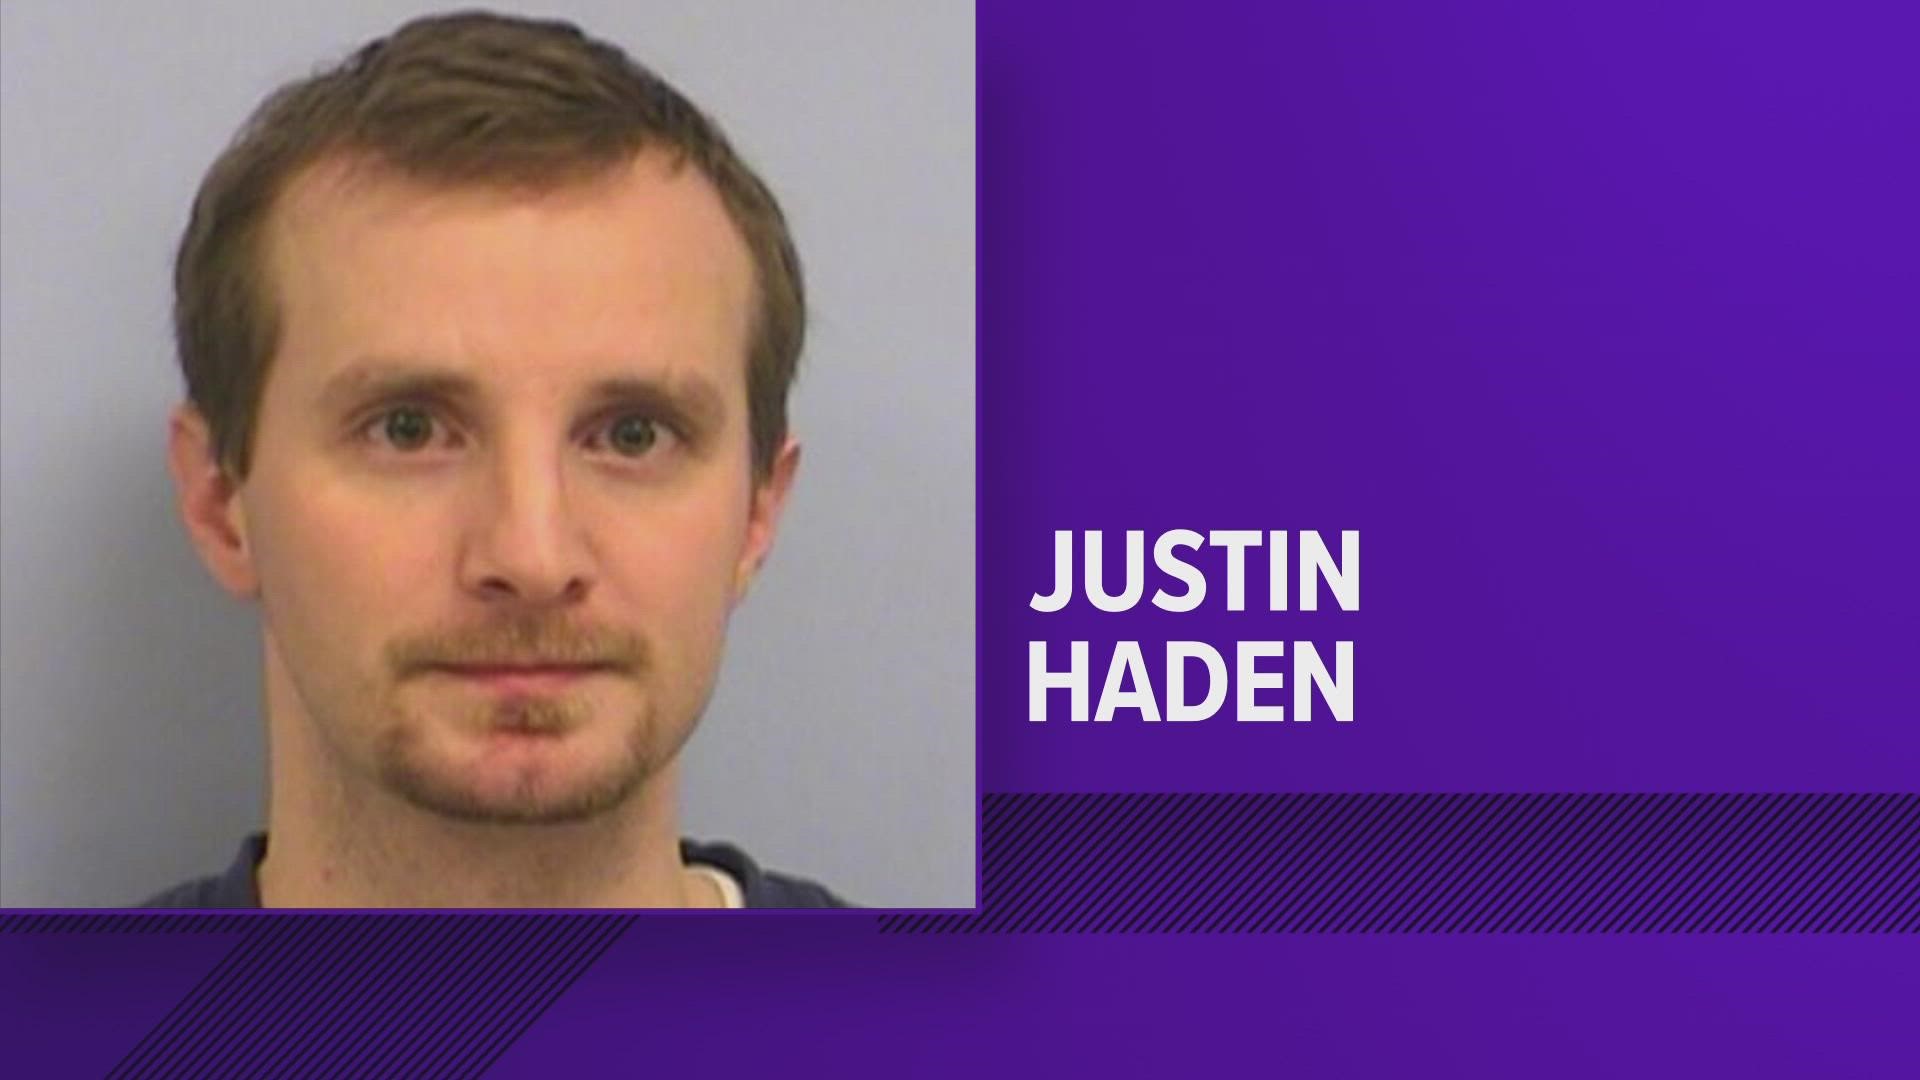 A search warrant has revealed disturbing new details about the disappearance of Justin Haden, who was last seen near the Domain on Nov. 1.